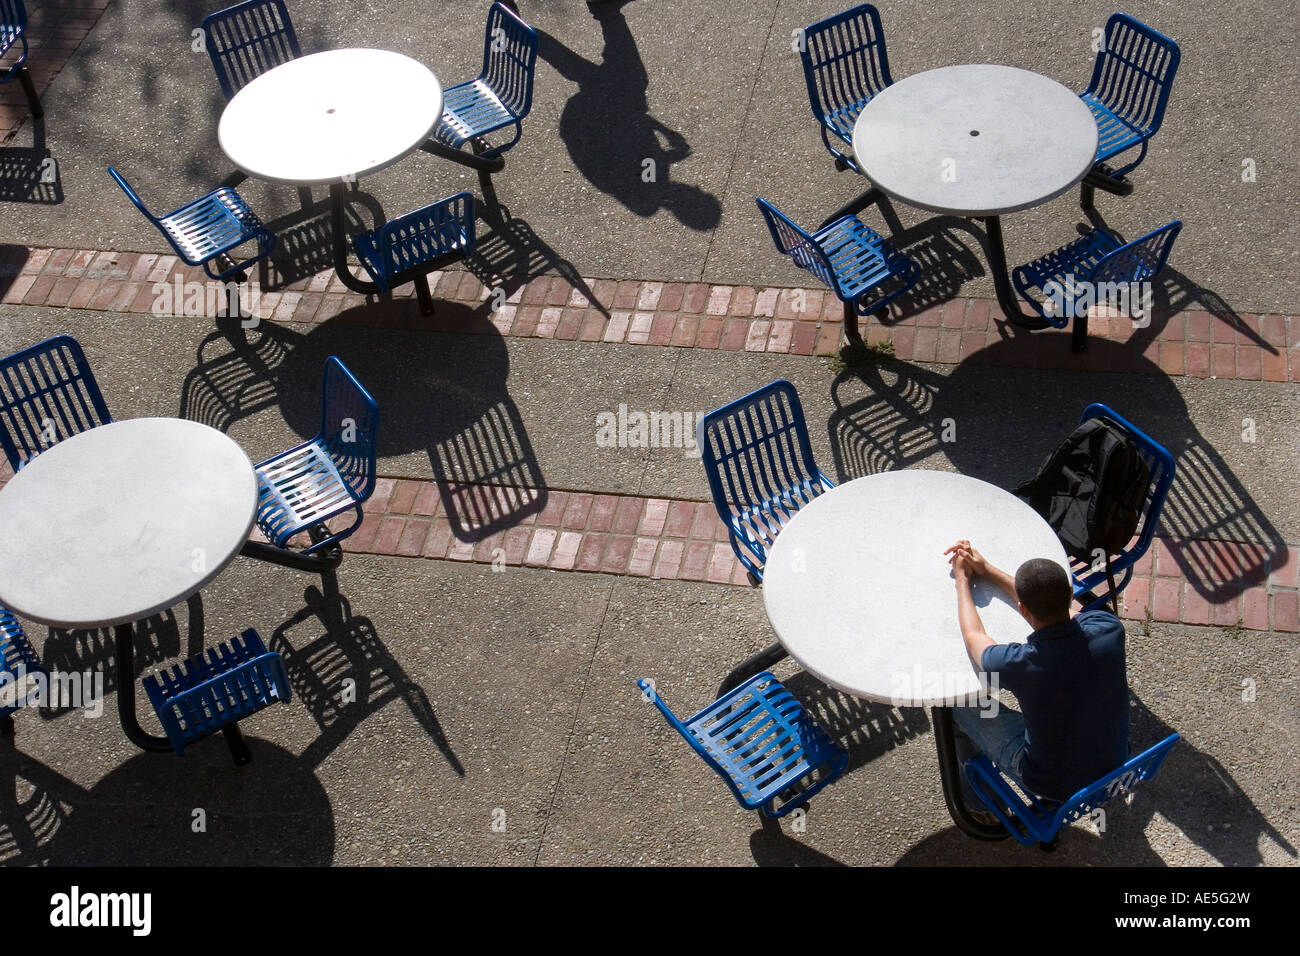 Man sitting alone at outdoor table with shadow of person walking by the tables Stock Photo